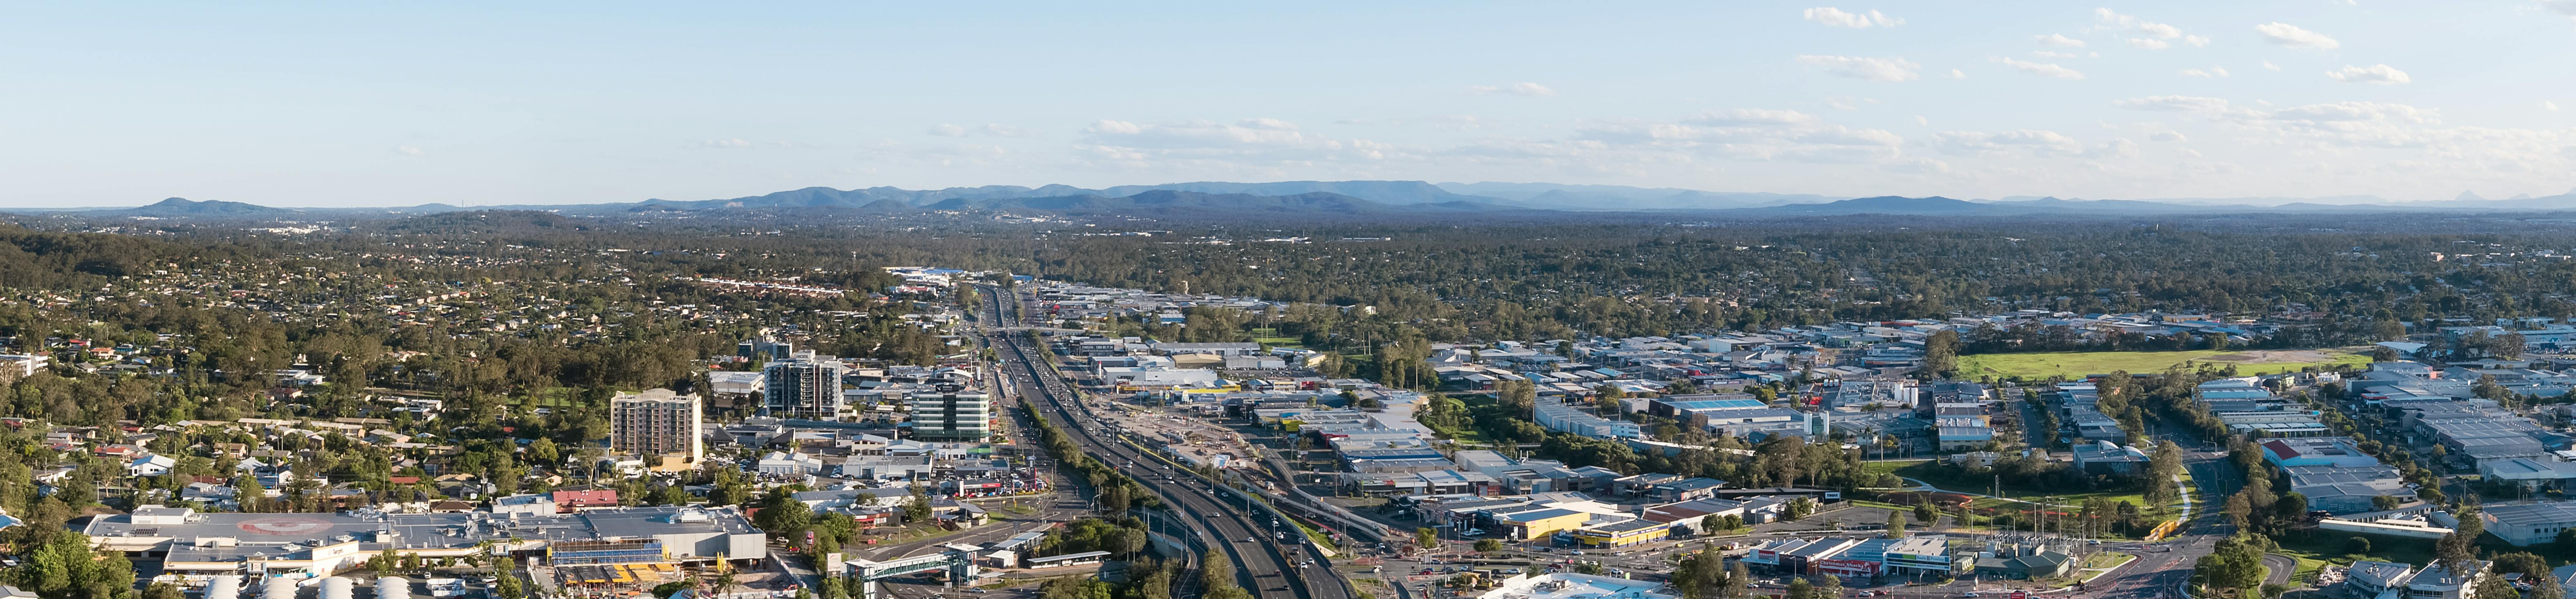 Aerial view of the City of Logan looking south from Springwood over the M1